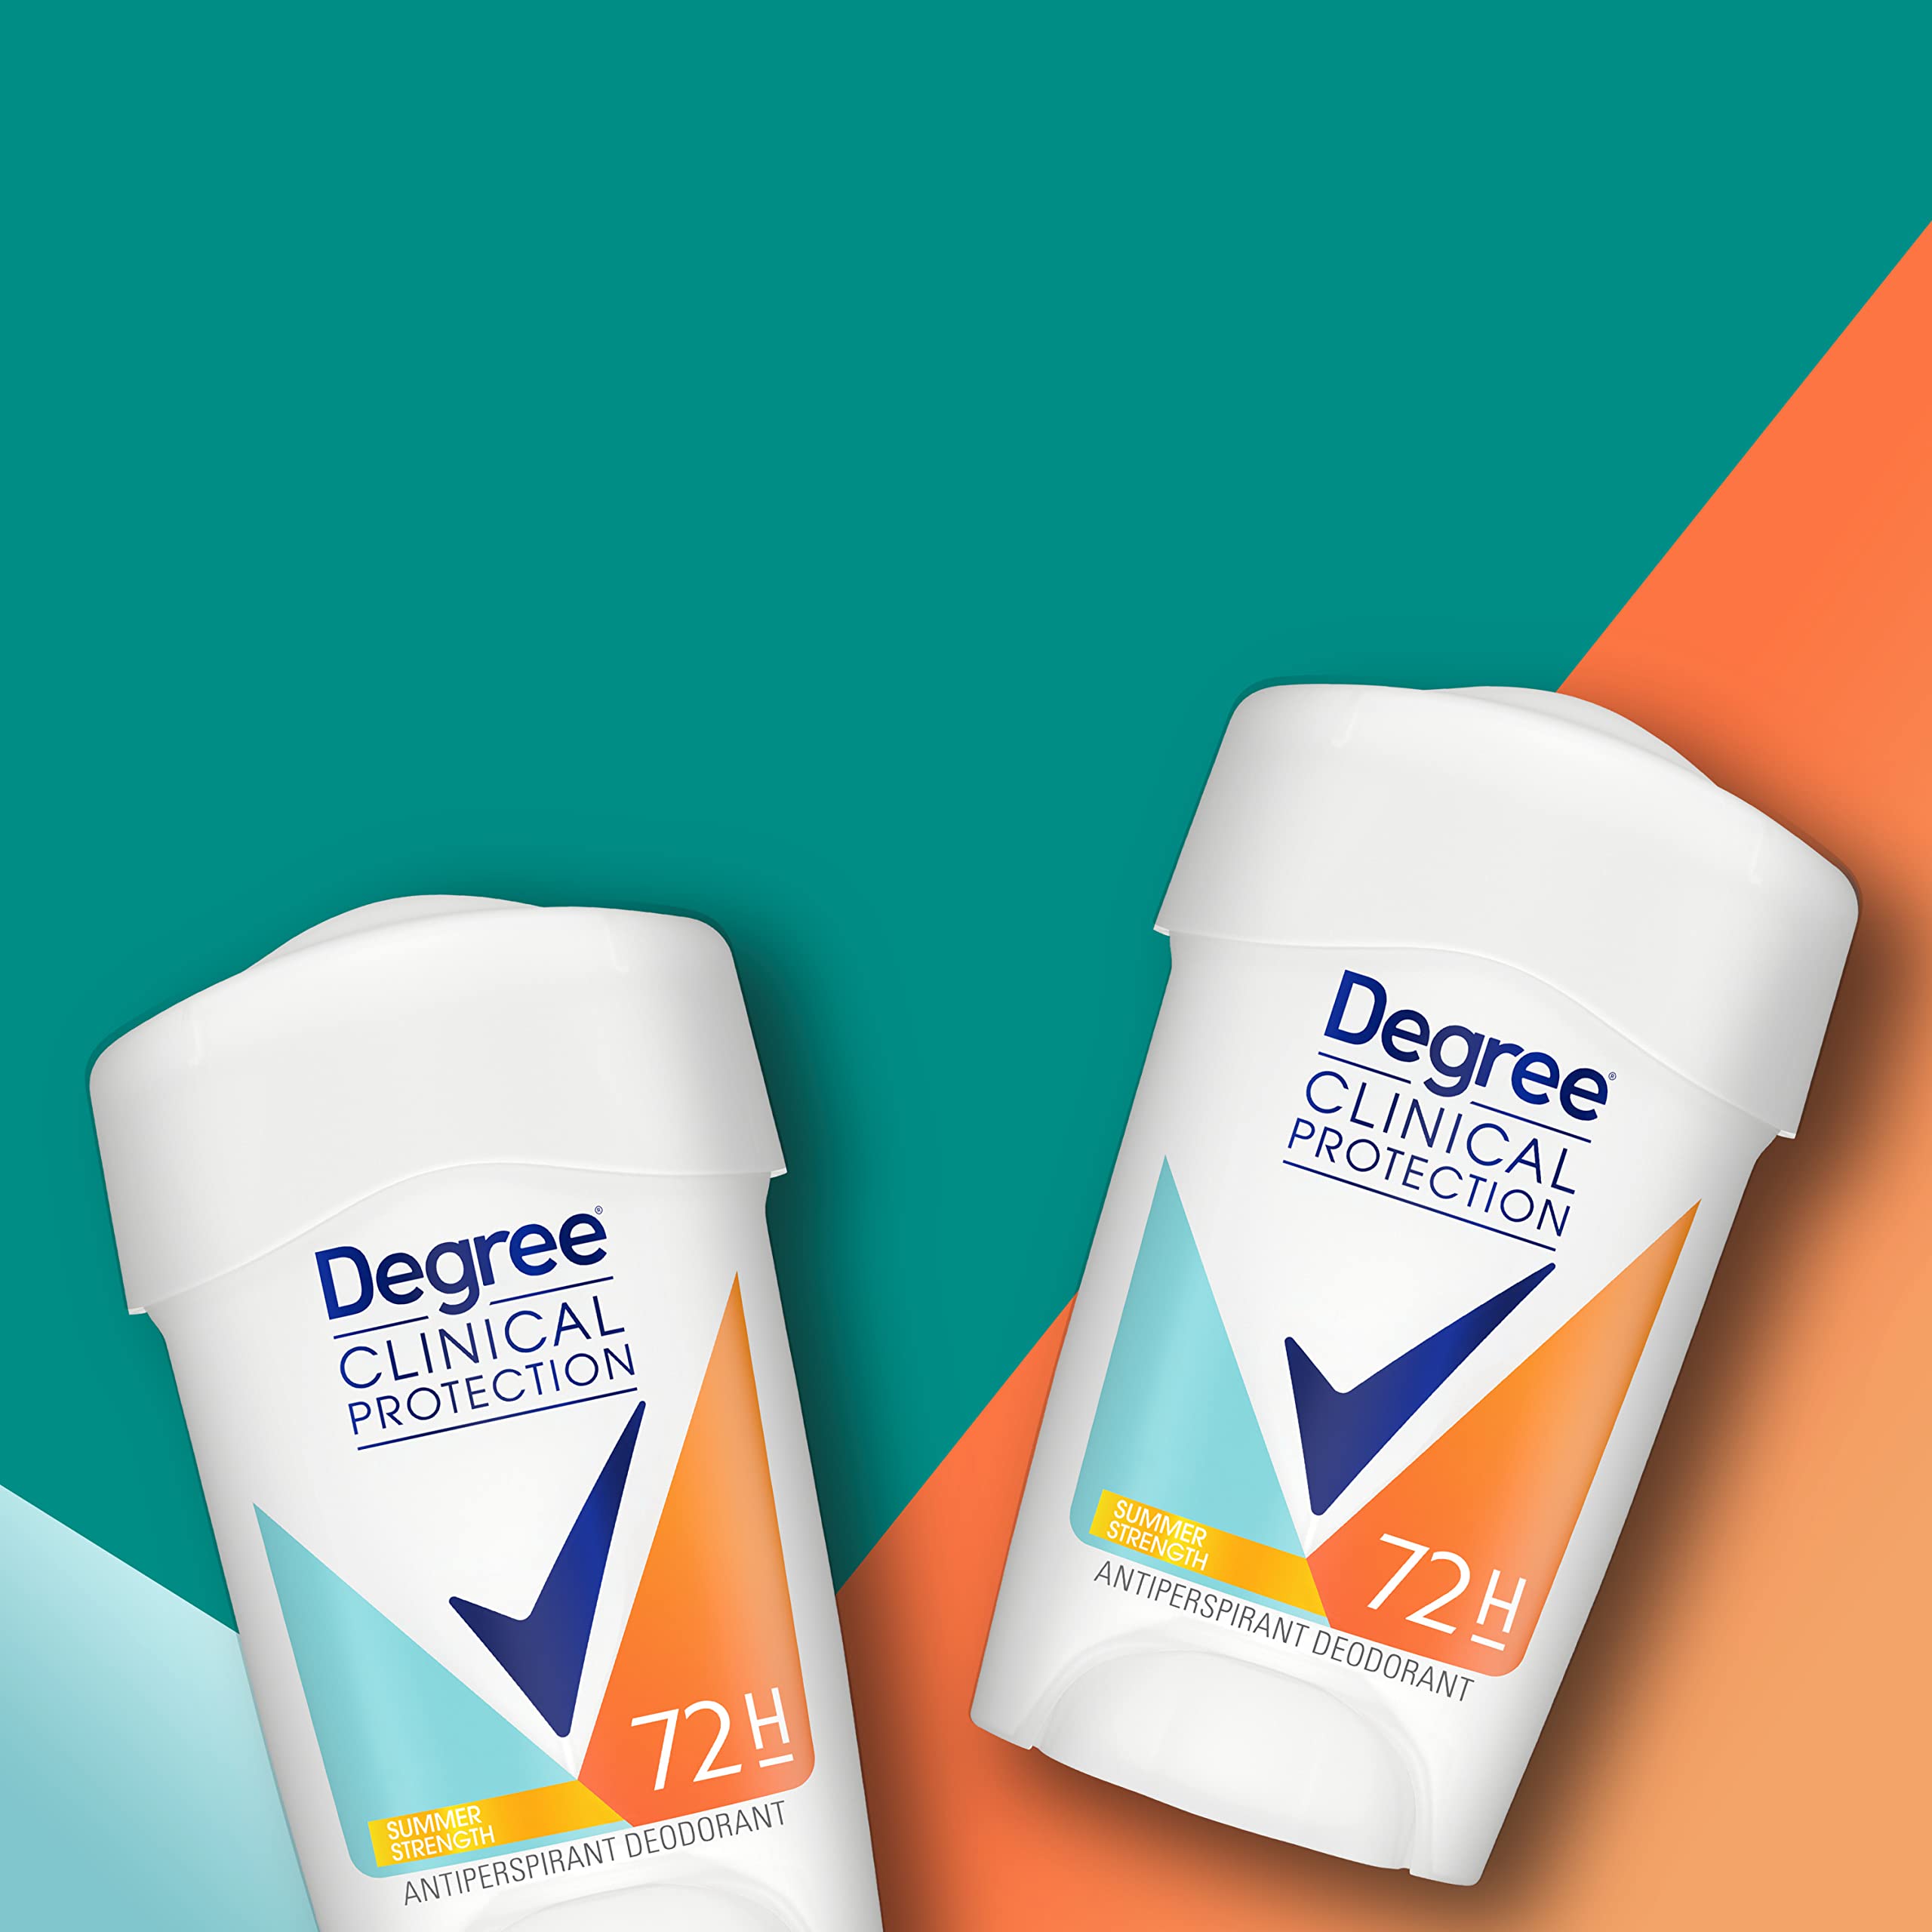 Degree Clinical Protection Antiperspirant Deodorant 72-Hour Sweat & Odor Protection Summer Strength Antiperspirant for Women 1.7 oz